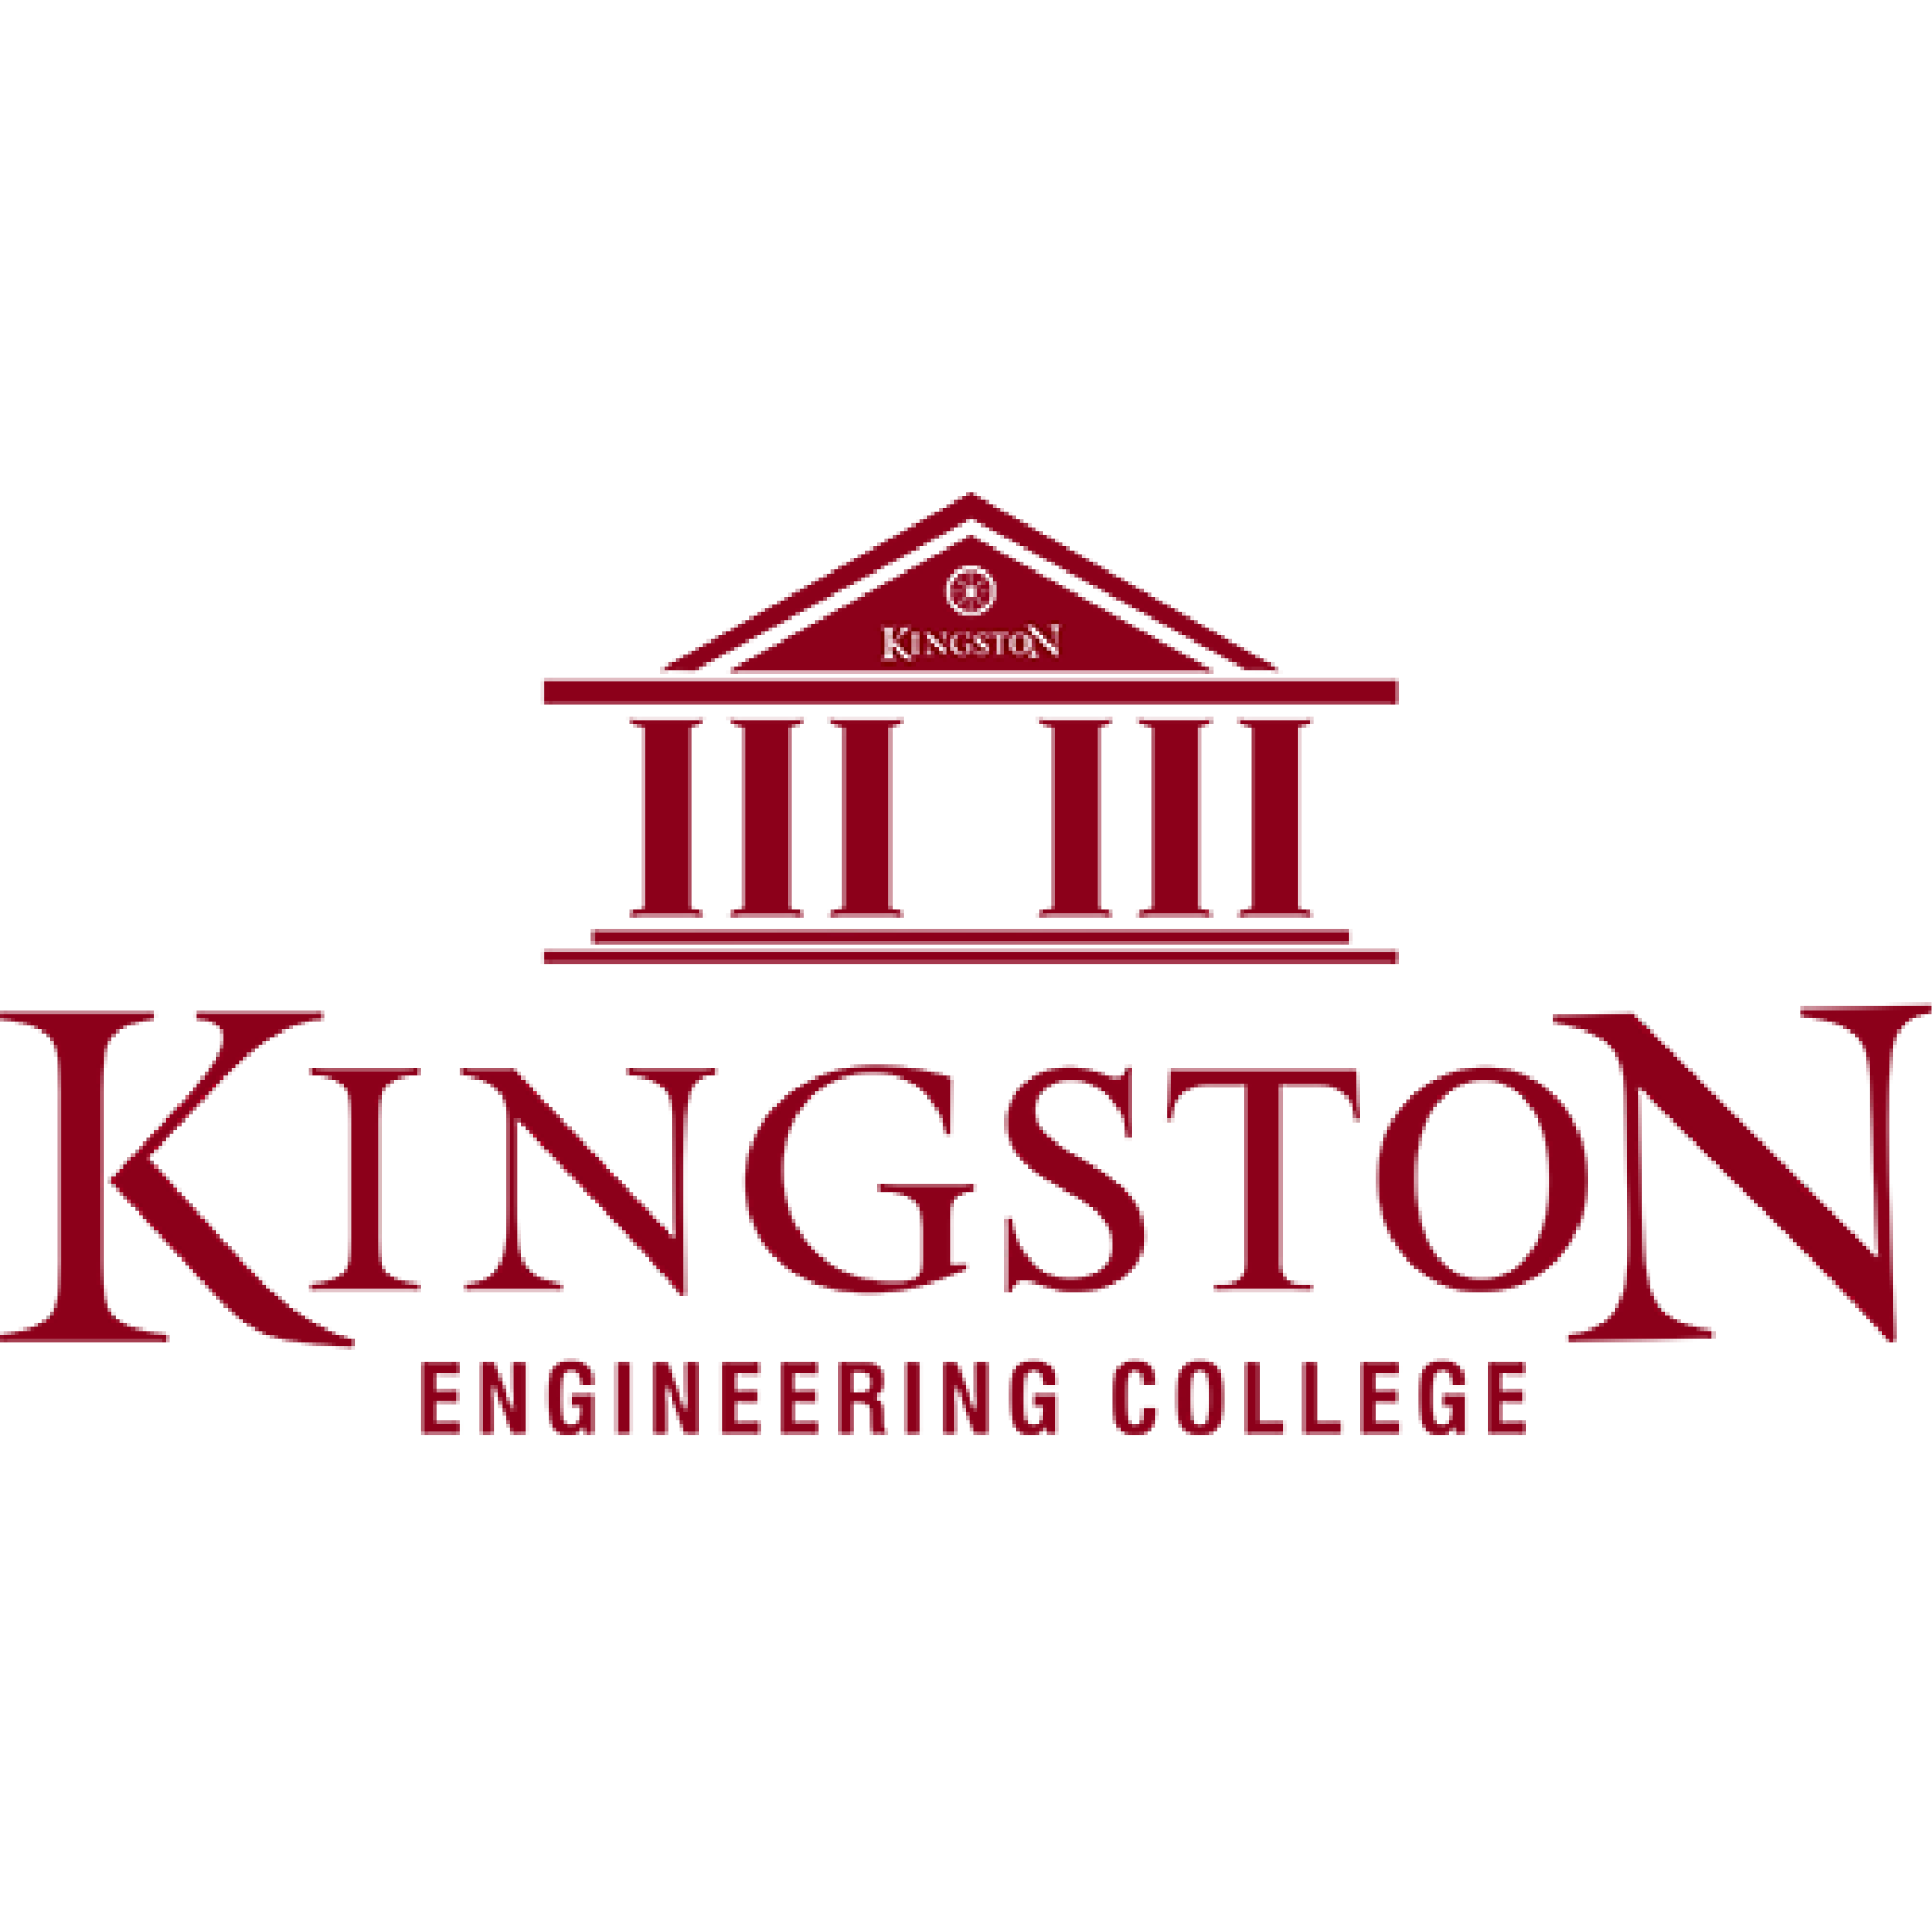 KINGSTON ENGINERING COLLEGE